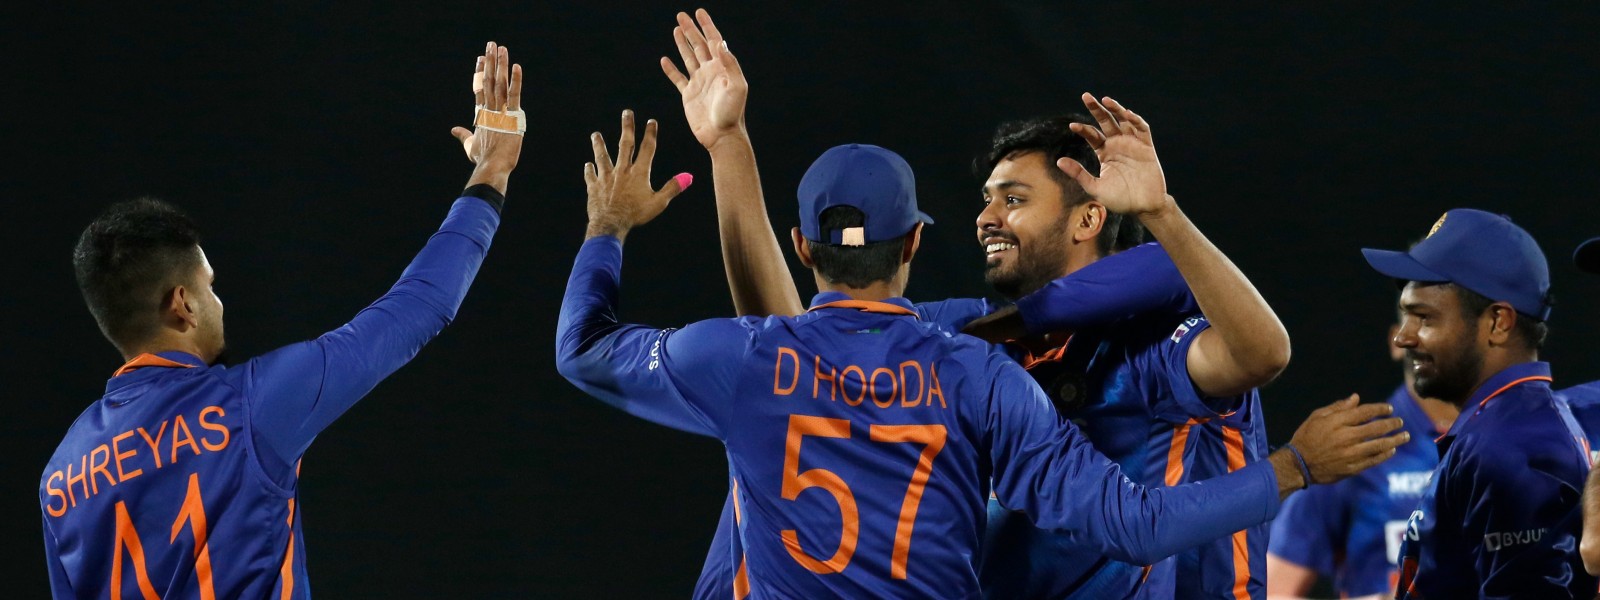 SL vs IND 3rd T20: Bowlers, Iyer power India to series whitewash